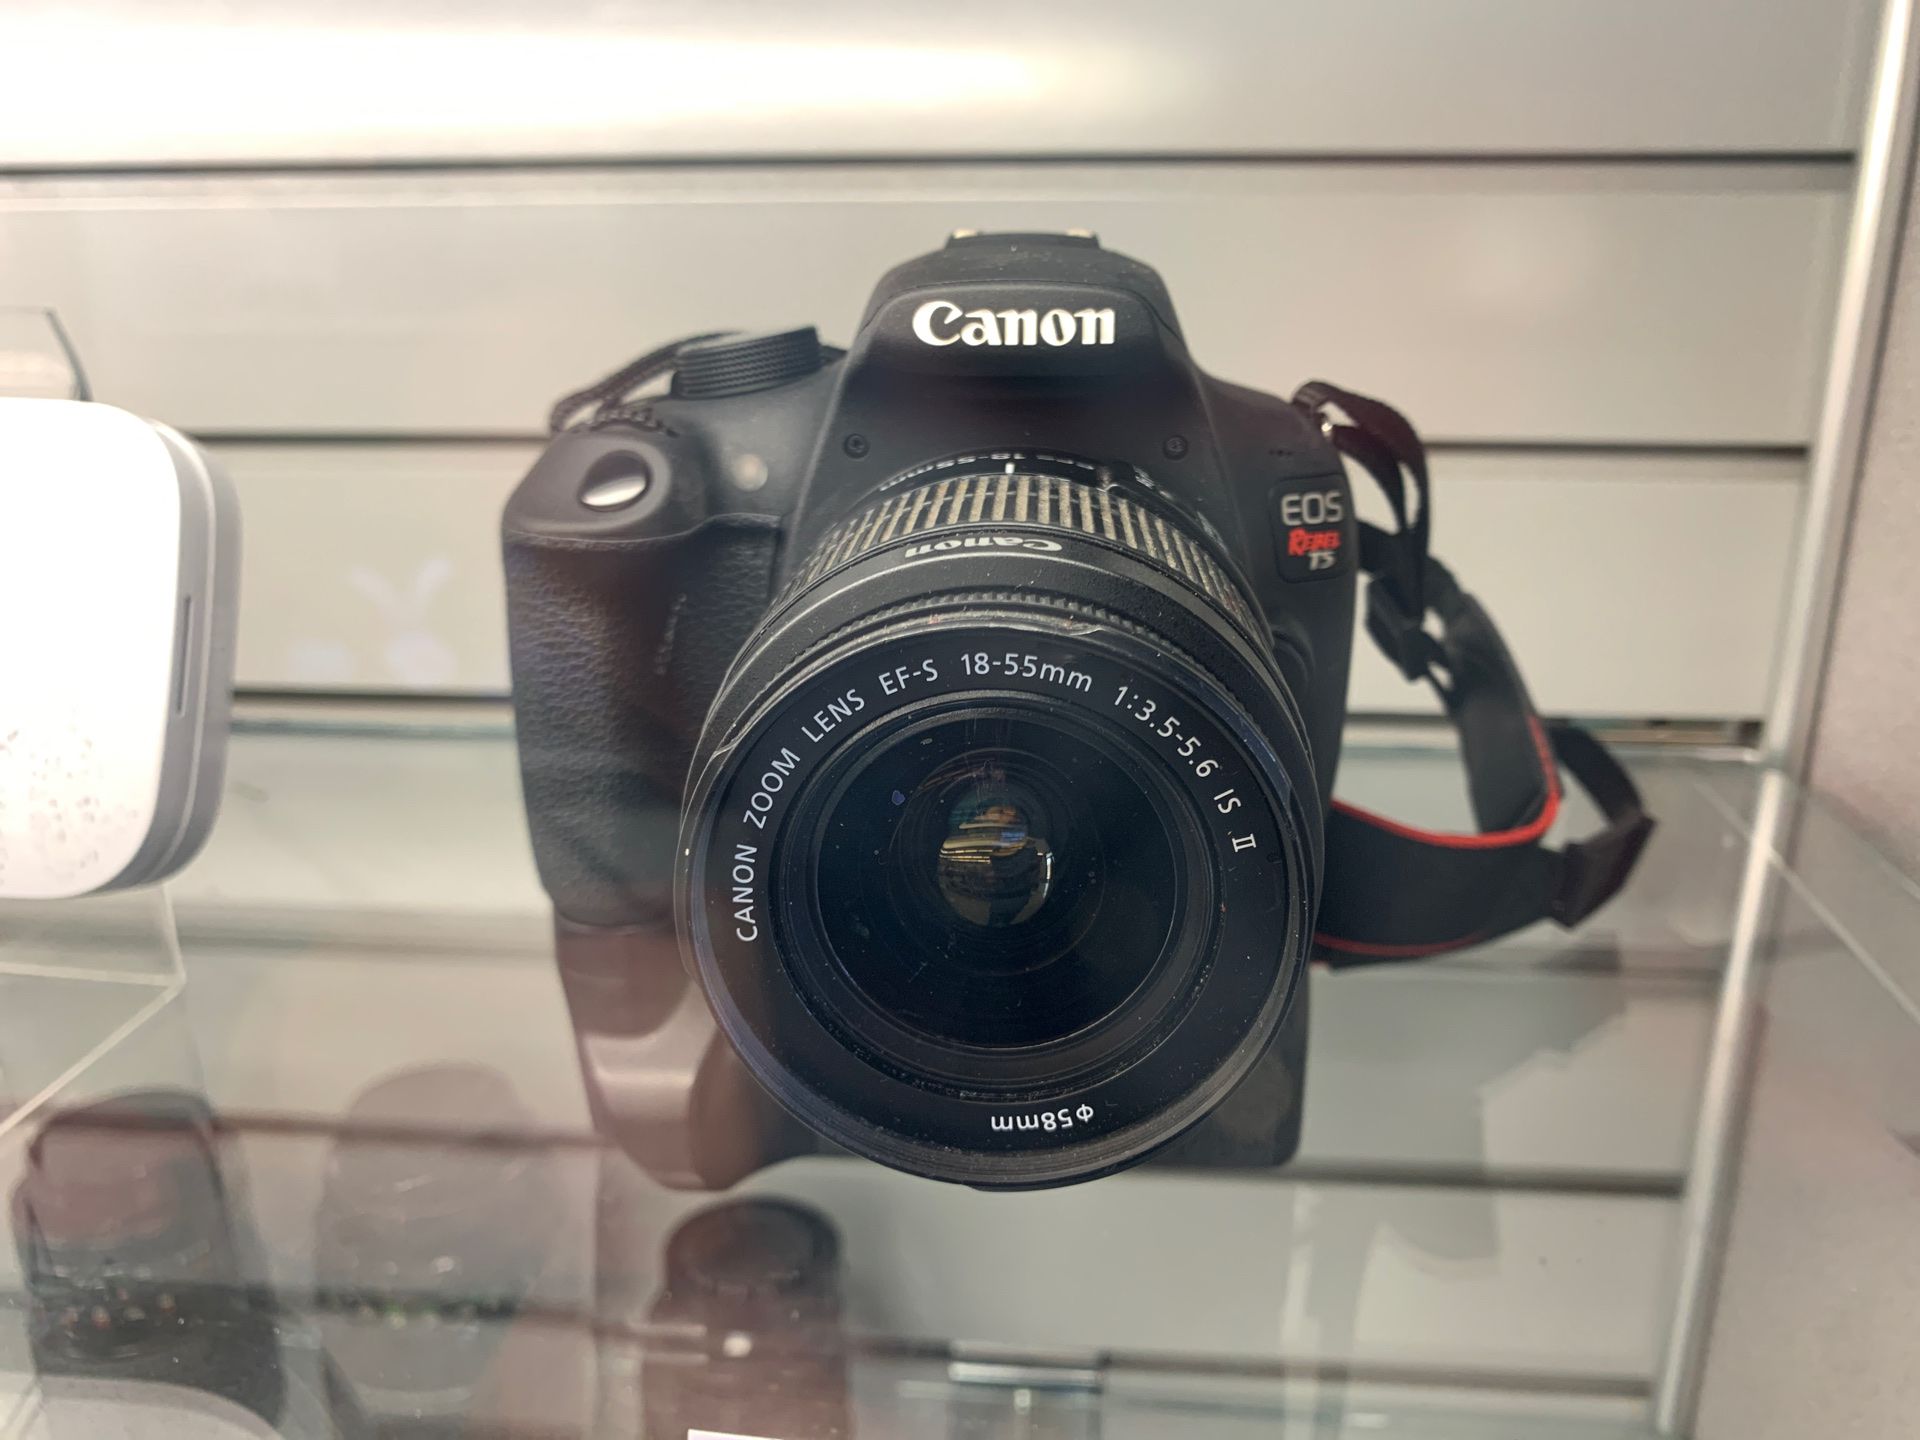 Canon E05 Rebel T5 with Battery Grip